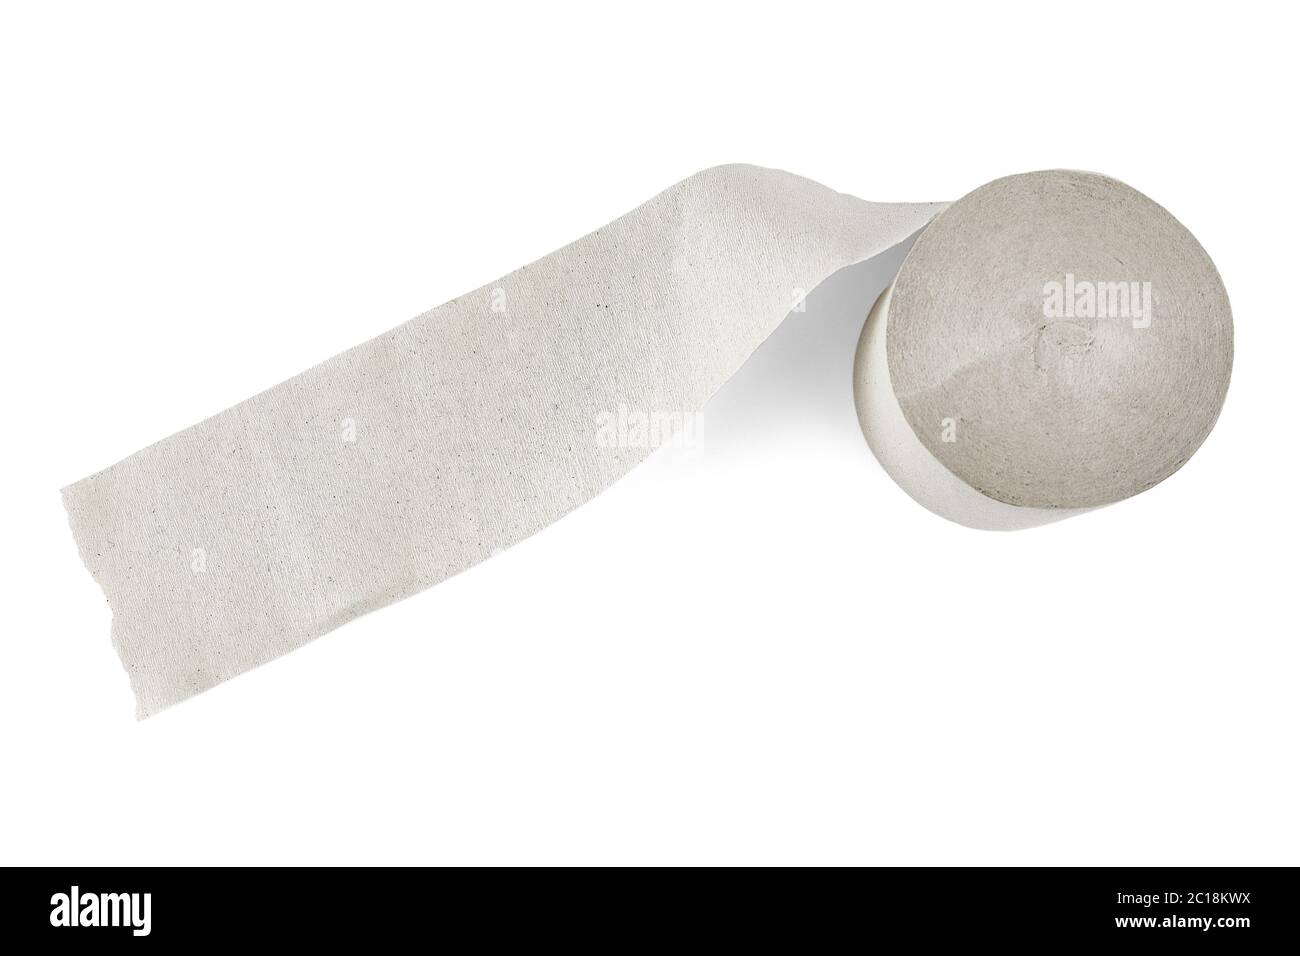 Unfolded roll of toilet paper isolated on white background. Stock Photo